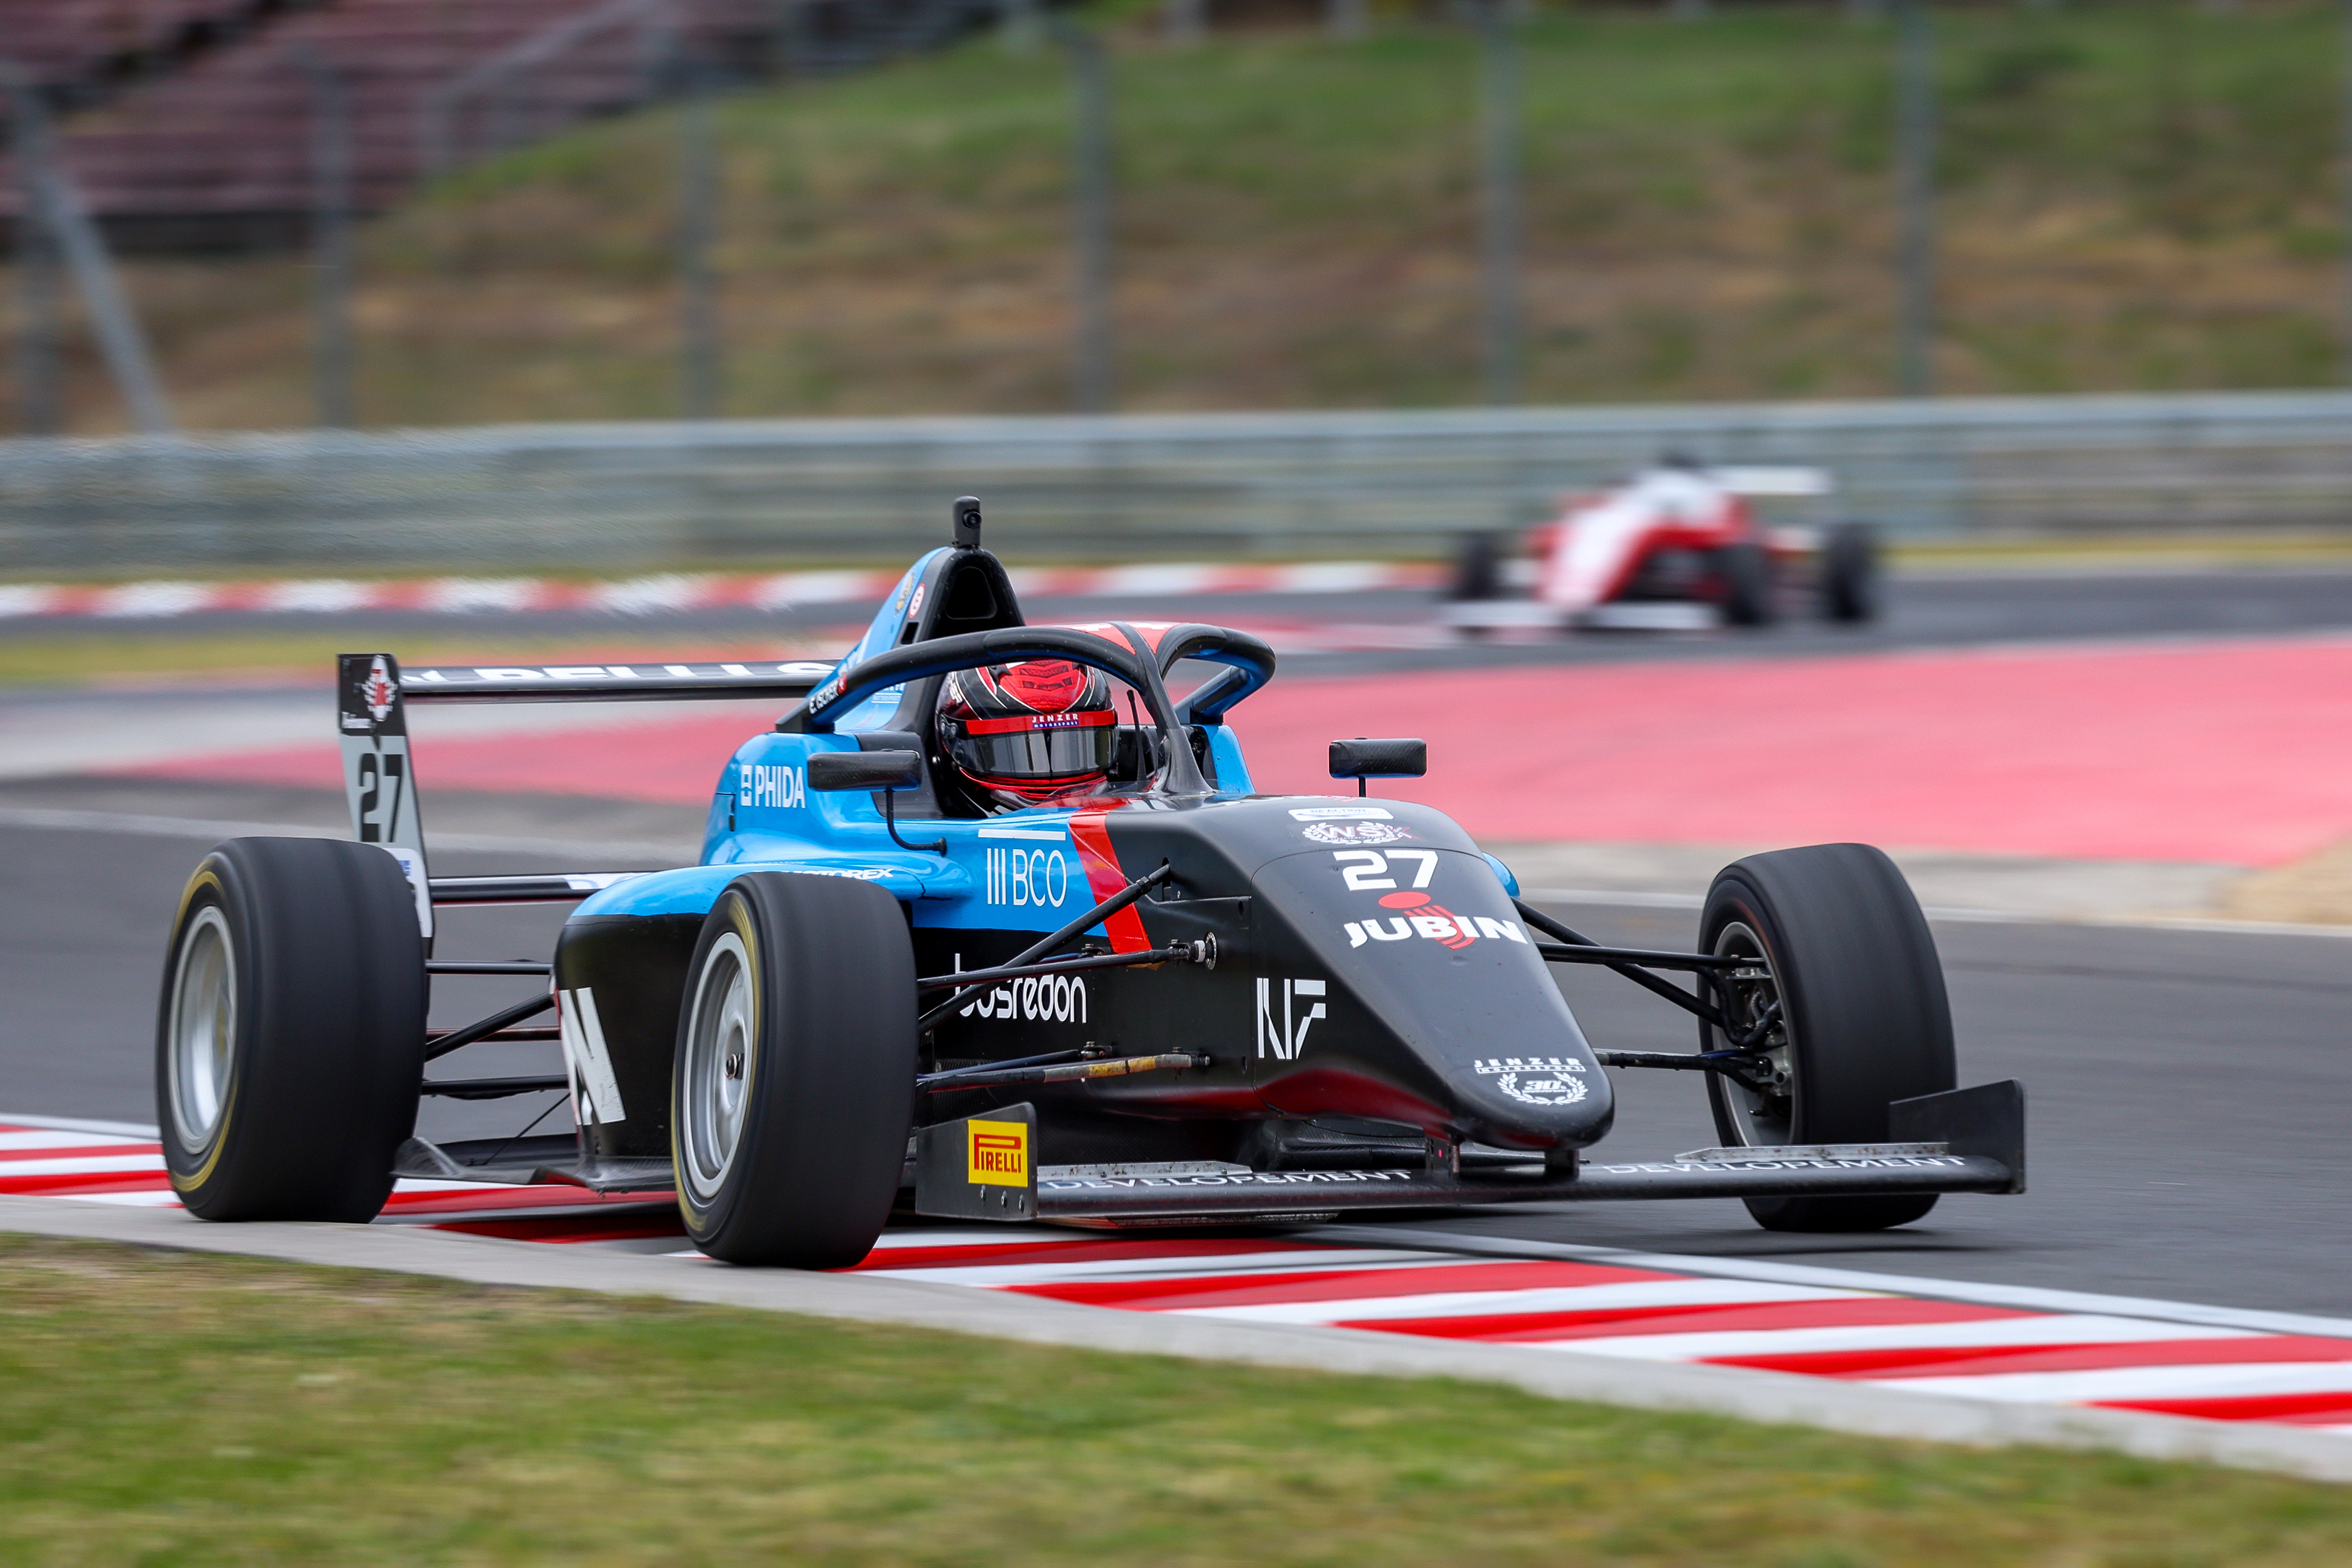 The premiere race of ACCR Czech Formula was won by Swiss driver Ethan Ischer